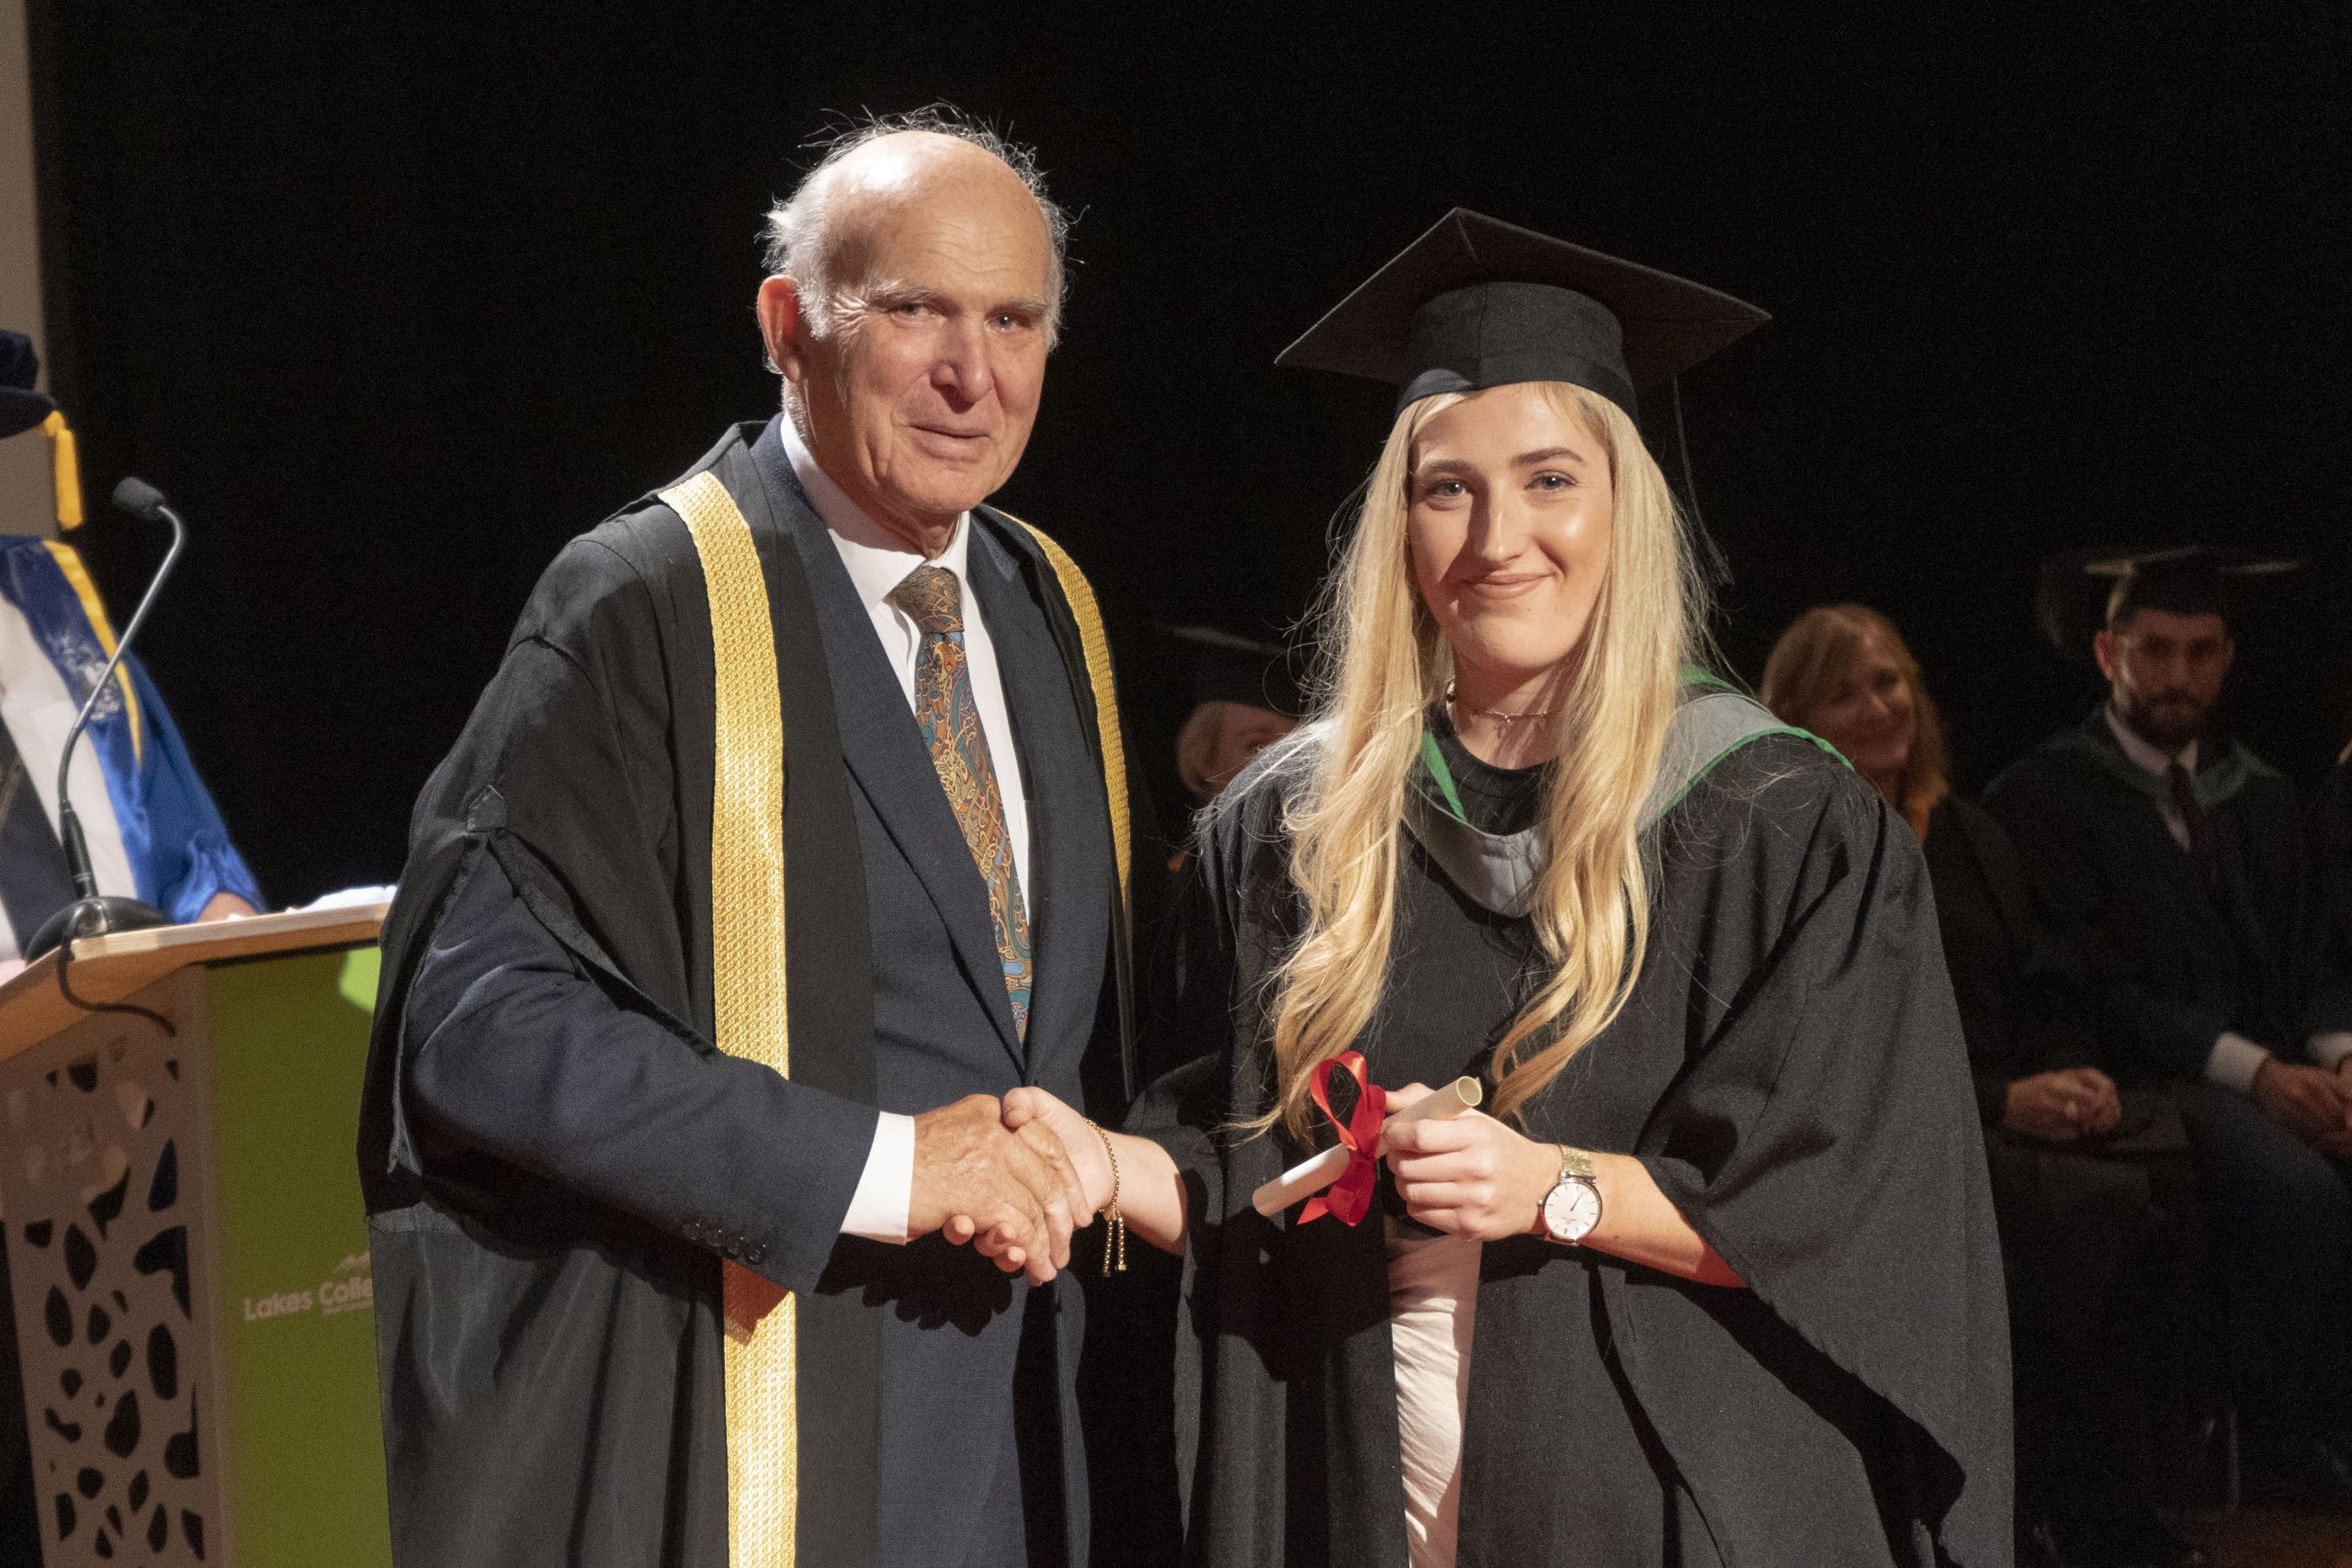 Sir Vince Cable, guest speaker at the graduation, shakes hands with graduate Sophie McSherry